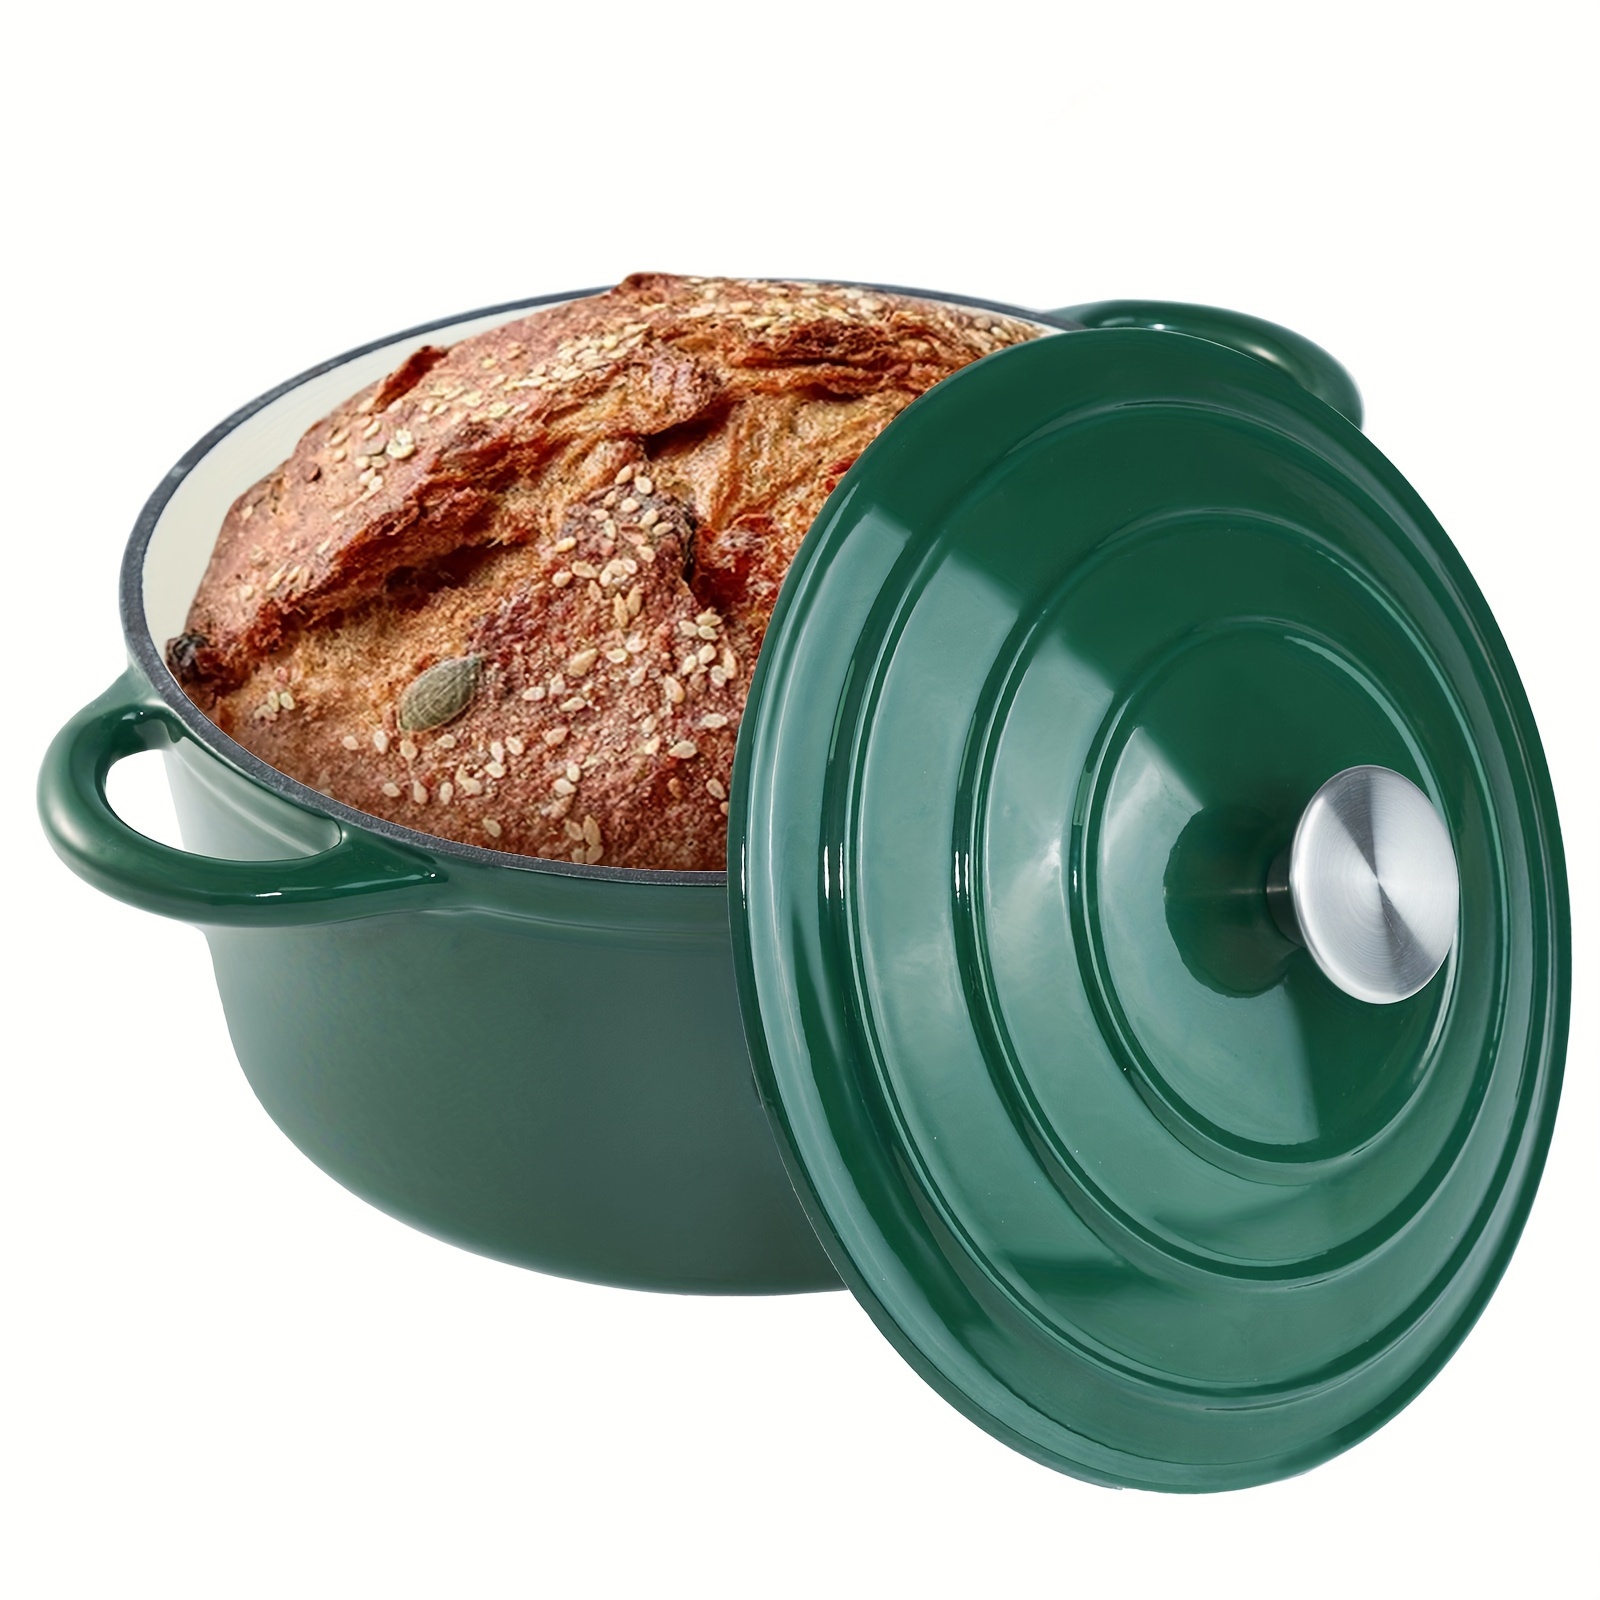 

6 Qt Enameled Dutch Oven Pot With Lid, Cast Iron Dutch Oven With Dual Handles For Bread Baking, Cooking, Non-stick Enamel Coated Cookware